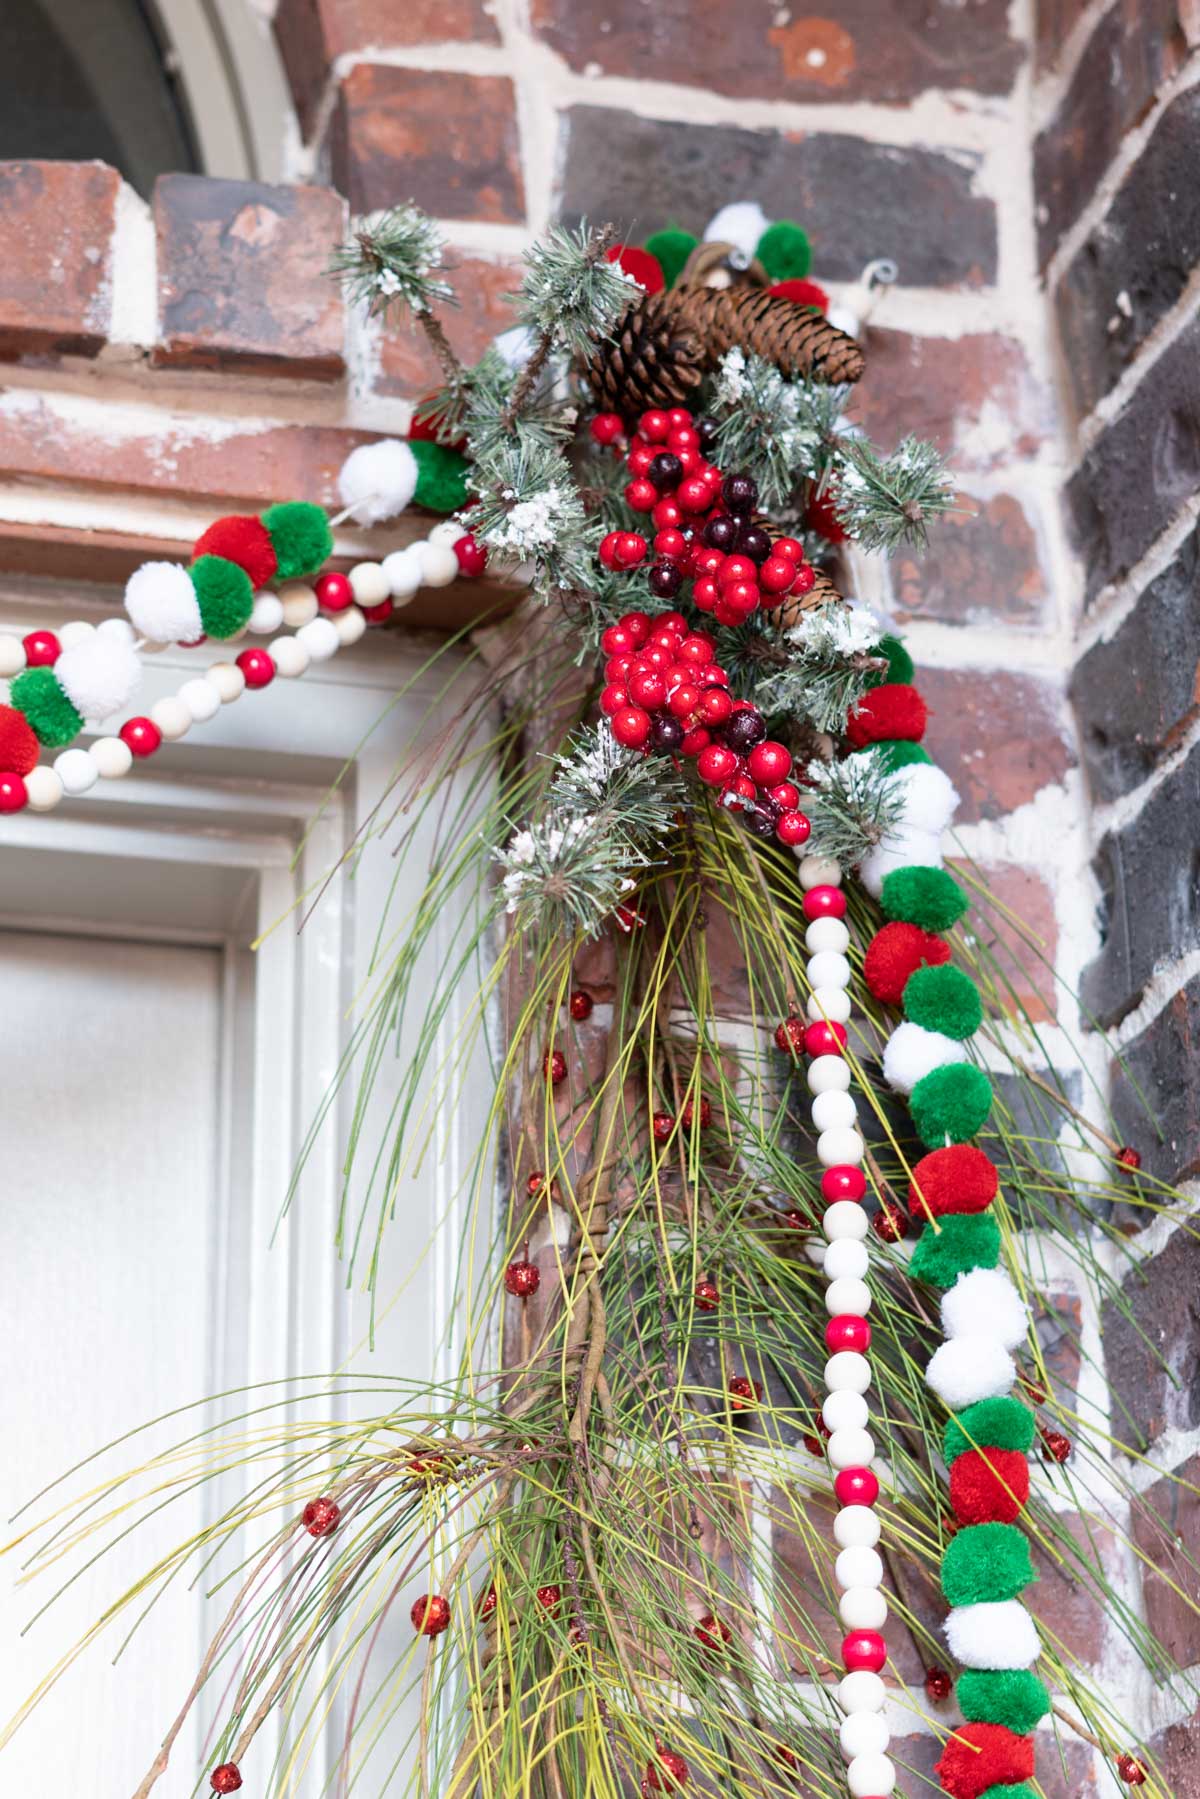 The corner of holiday garlands hung. A close up of a loose pine garland with red berries, a green, red and white pom pom string, and a red, white and natural wooden bead string, topped with frosted evergreens and red berries.